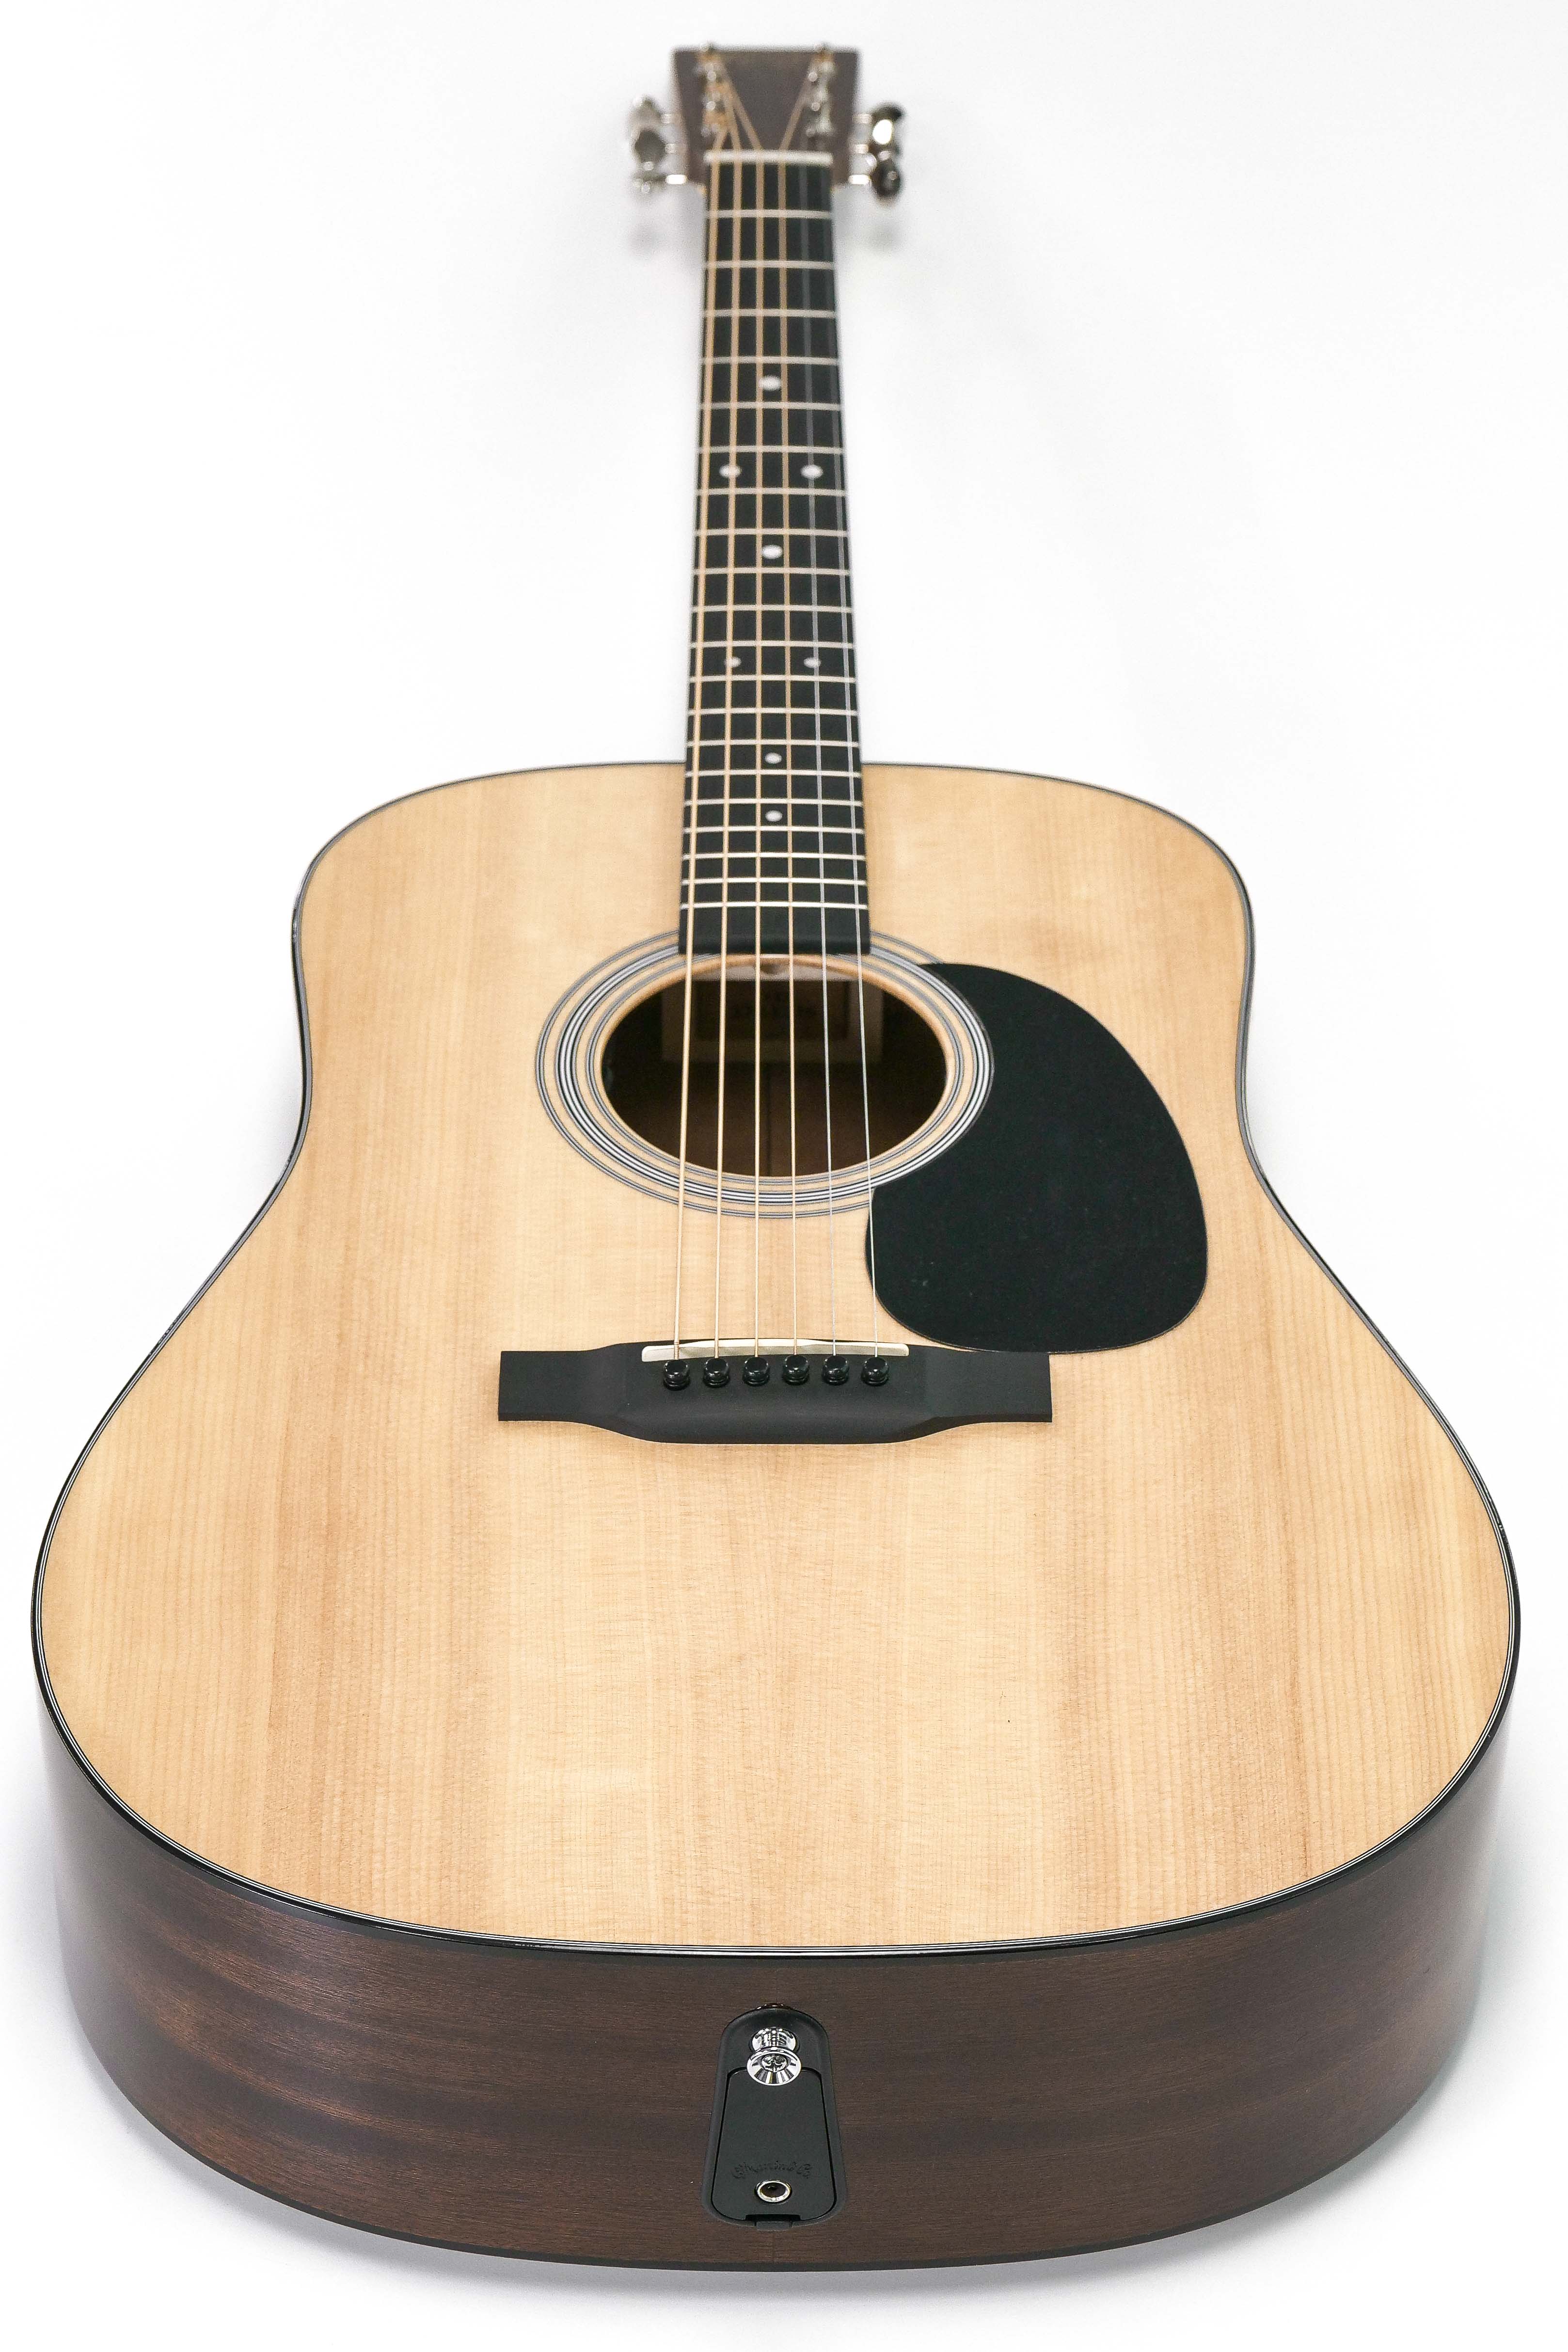 Martin D-12E Acoustic Electric Guitar - Terry Carter Music Store